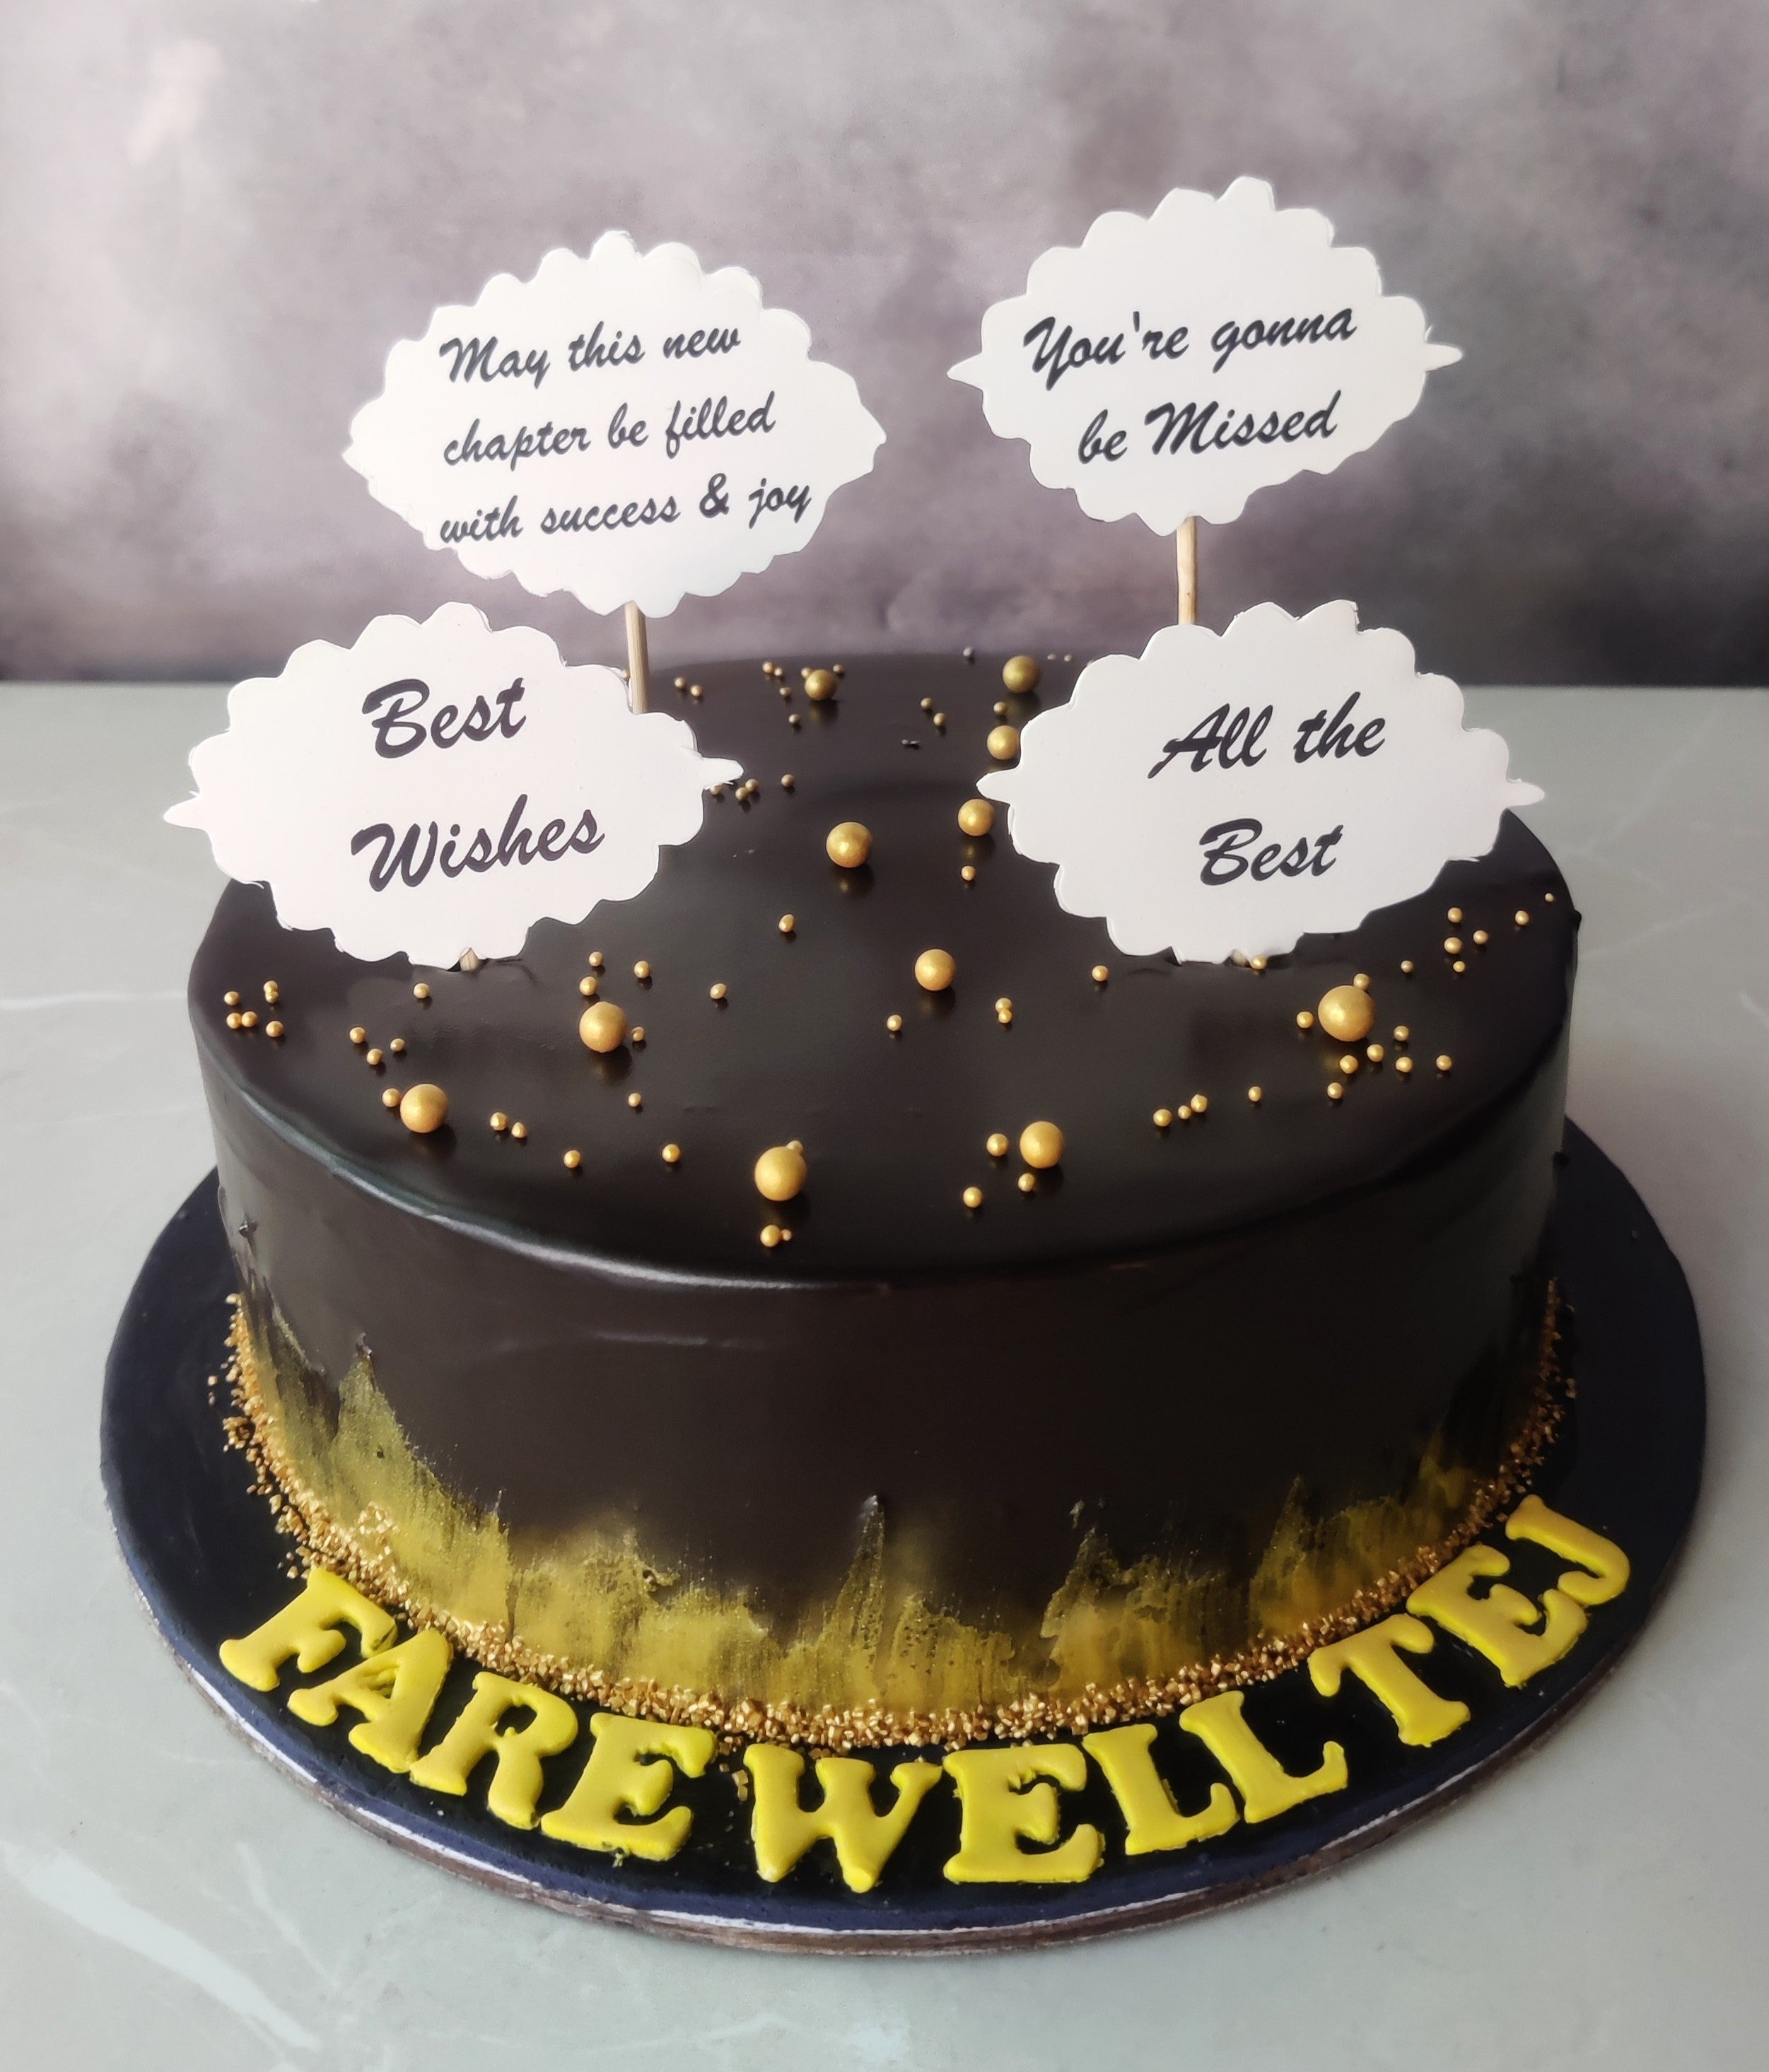 Bye Felicia Cake Topper,Funny Cake Decorating for Retirement/Farewell/  Going Away Party Decorations Supplies,Funny Cake Decor for Single AF Party  - Walmart.com